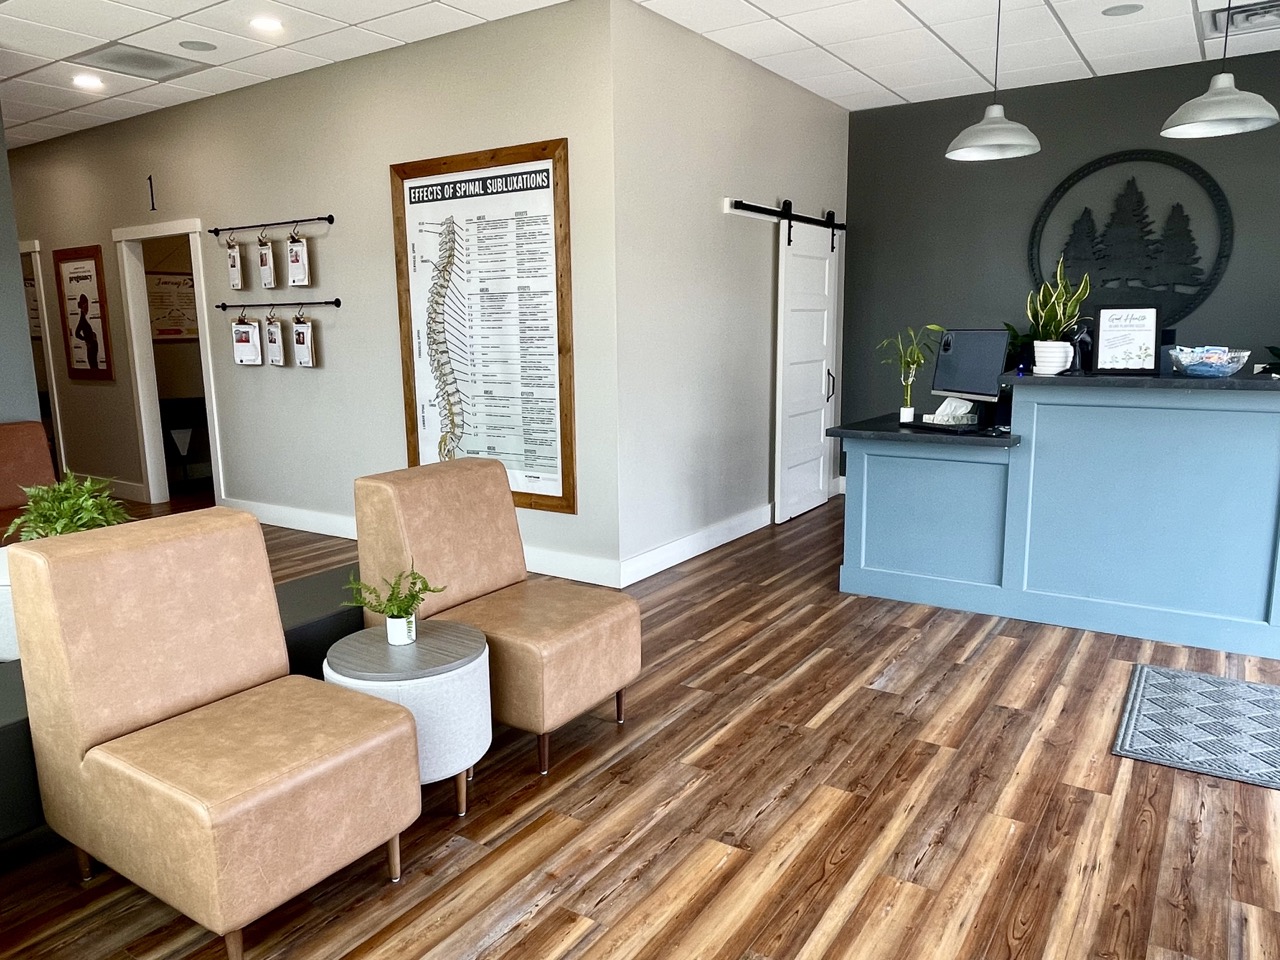 legacy chiropractic office tour